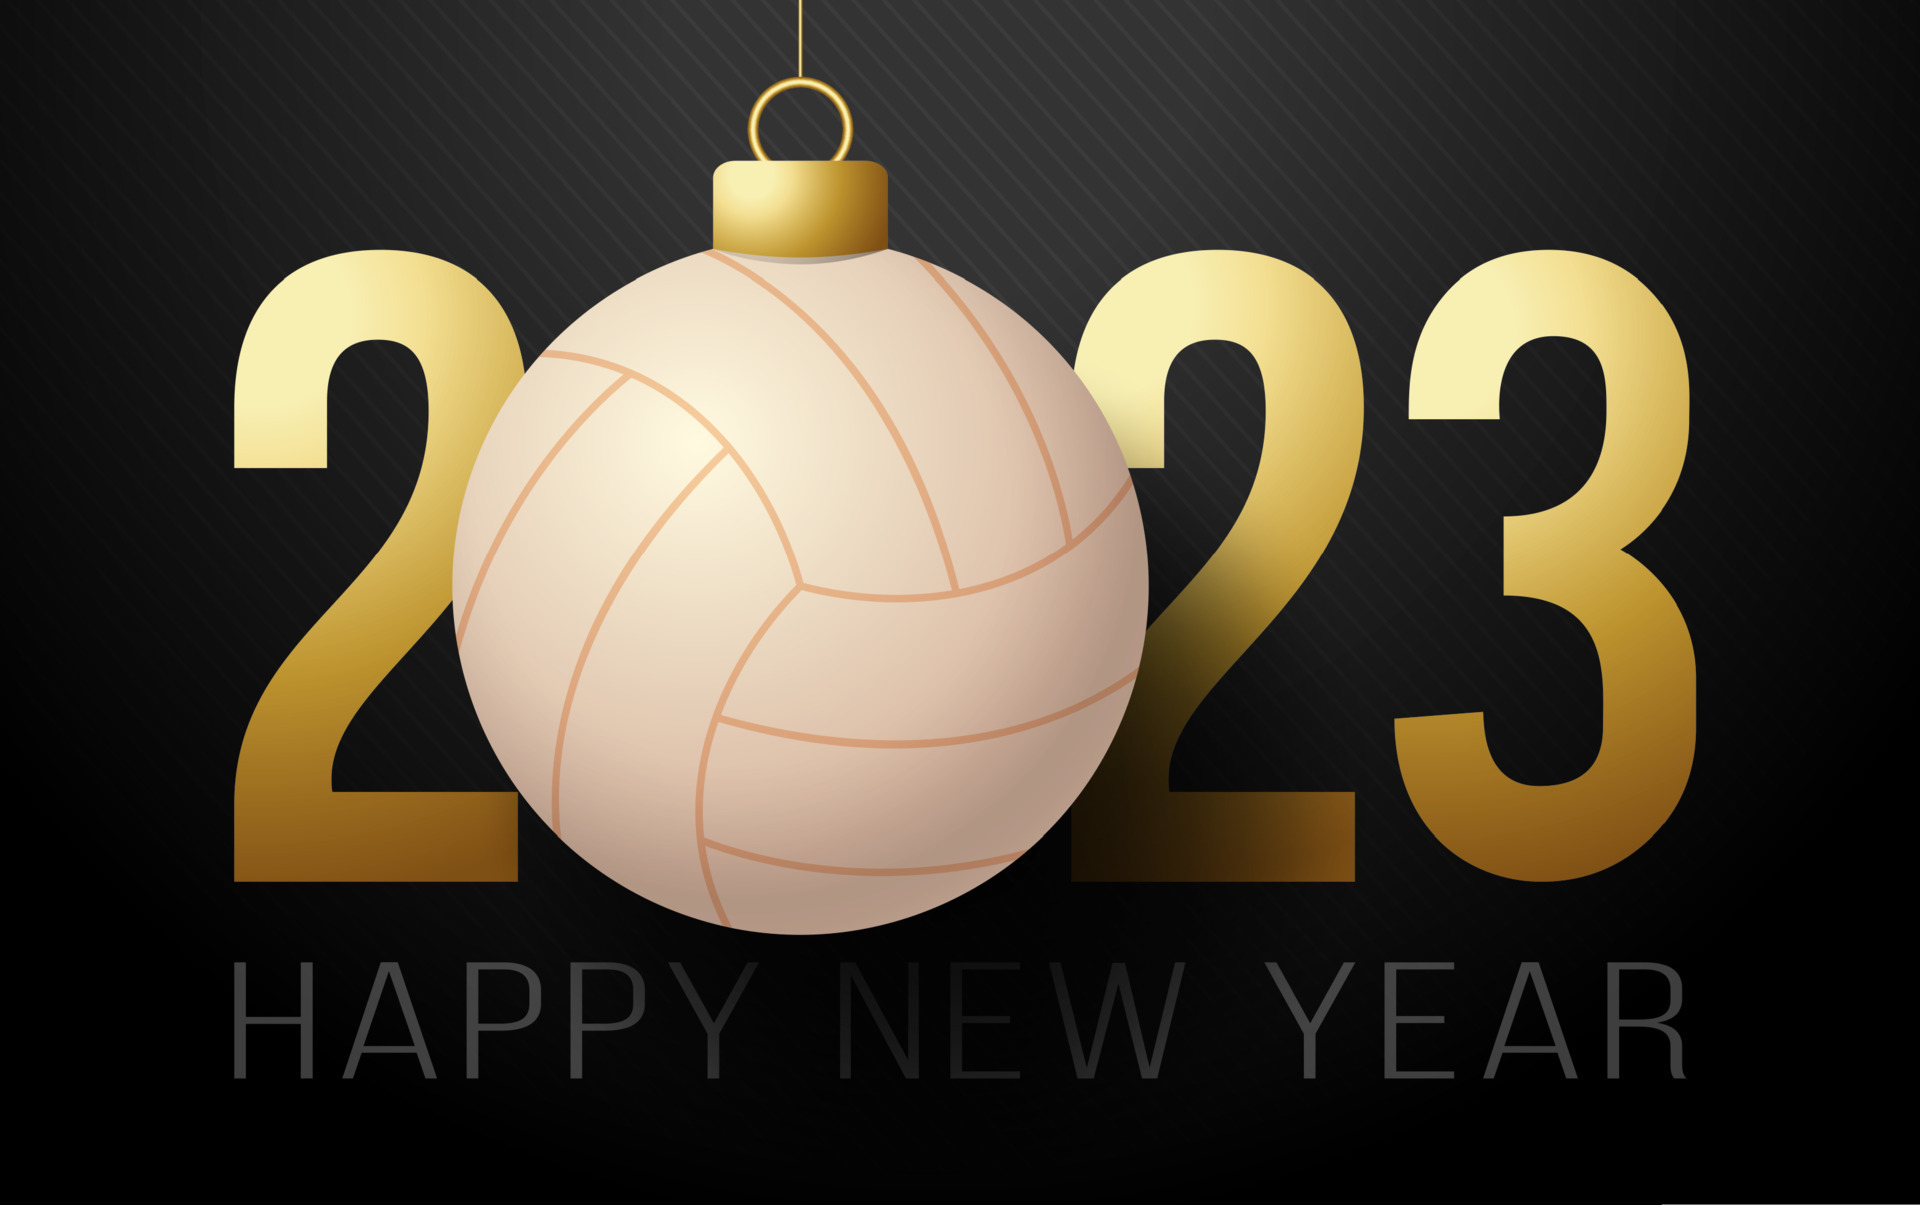 Volleyball 2023 Happy New Year. Sports greeting card with volleyball ball on the luxury background. Vector illustration